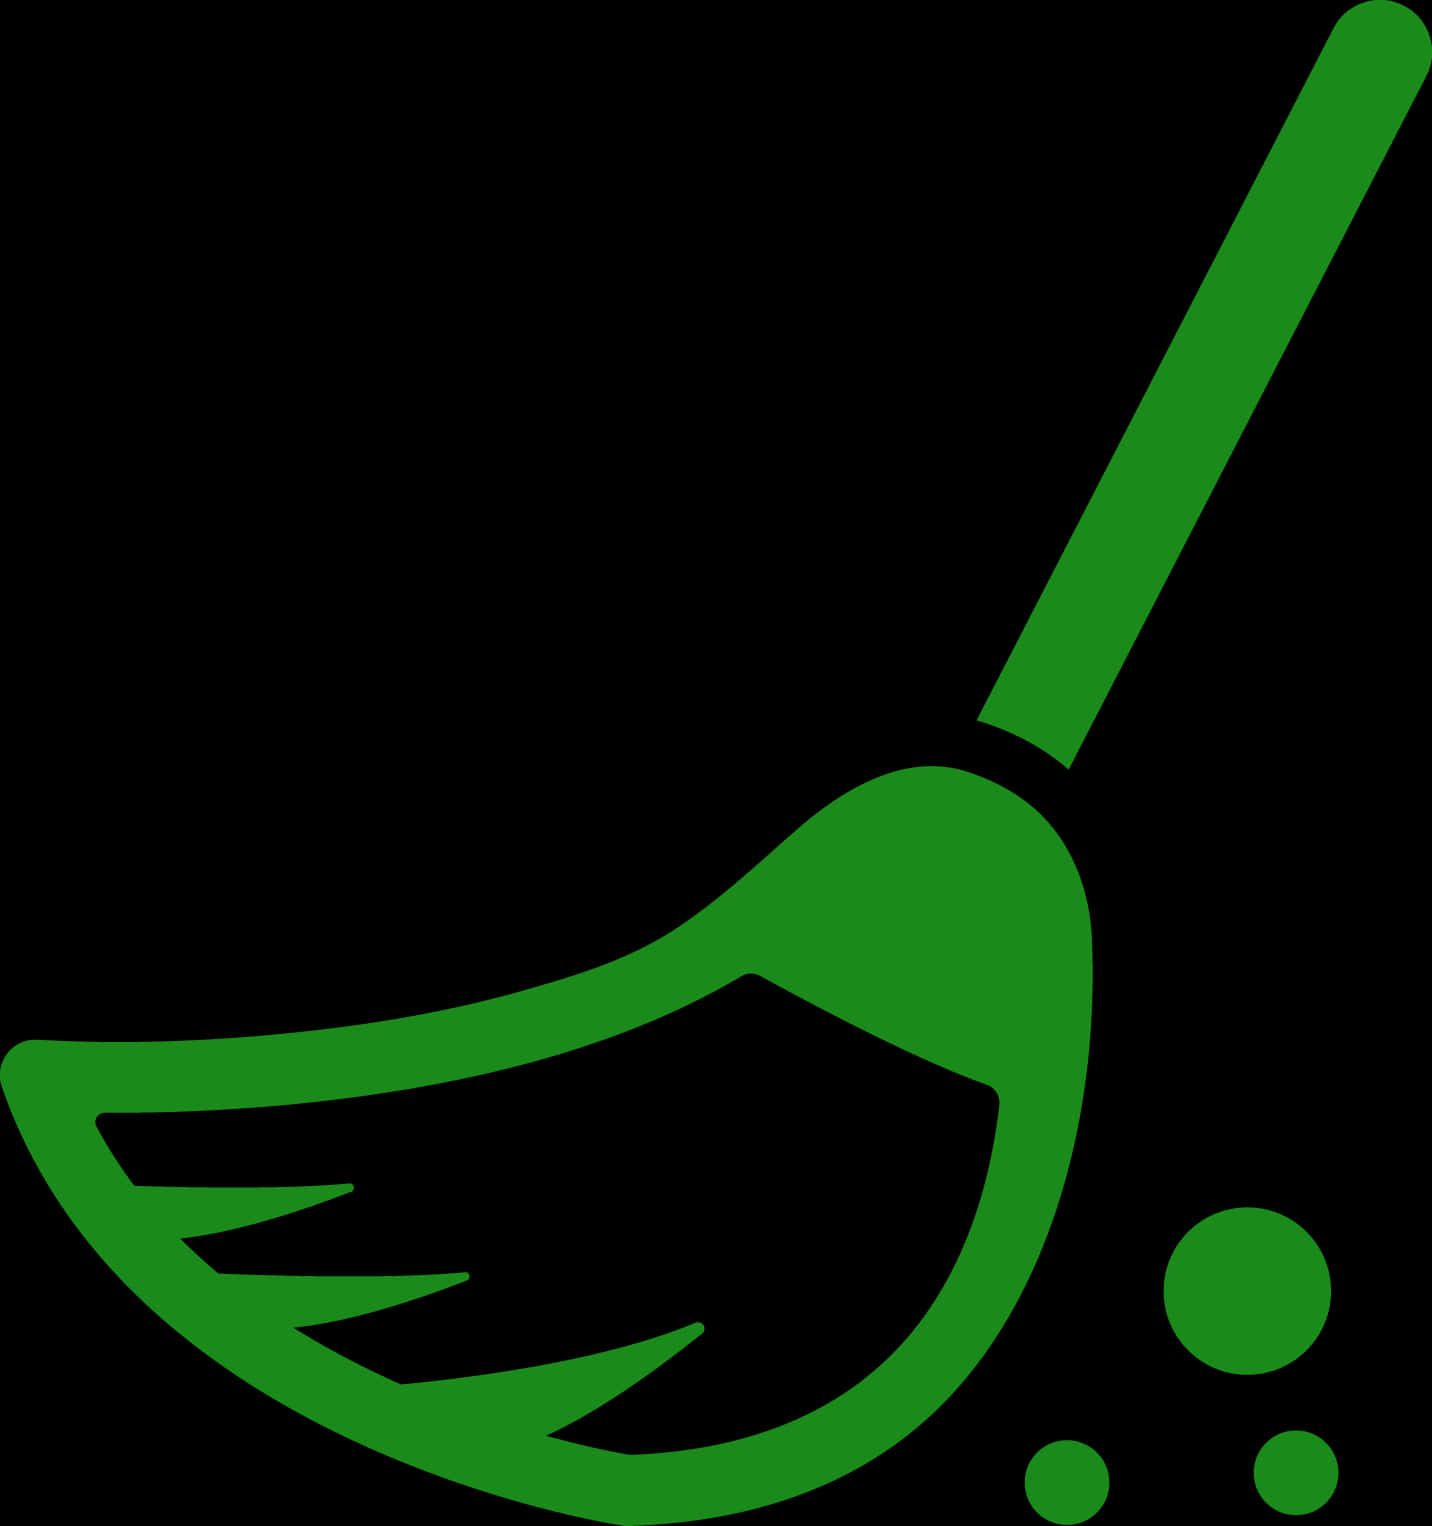 A Green Broom With Black Background